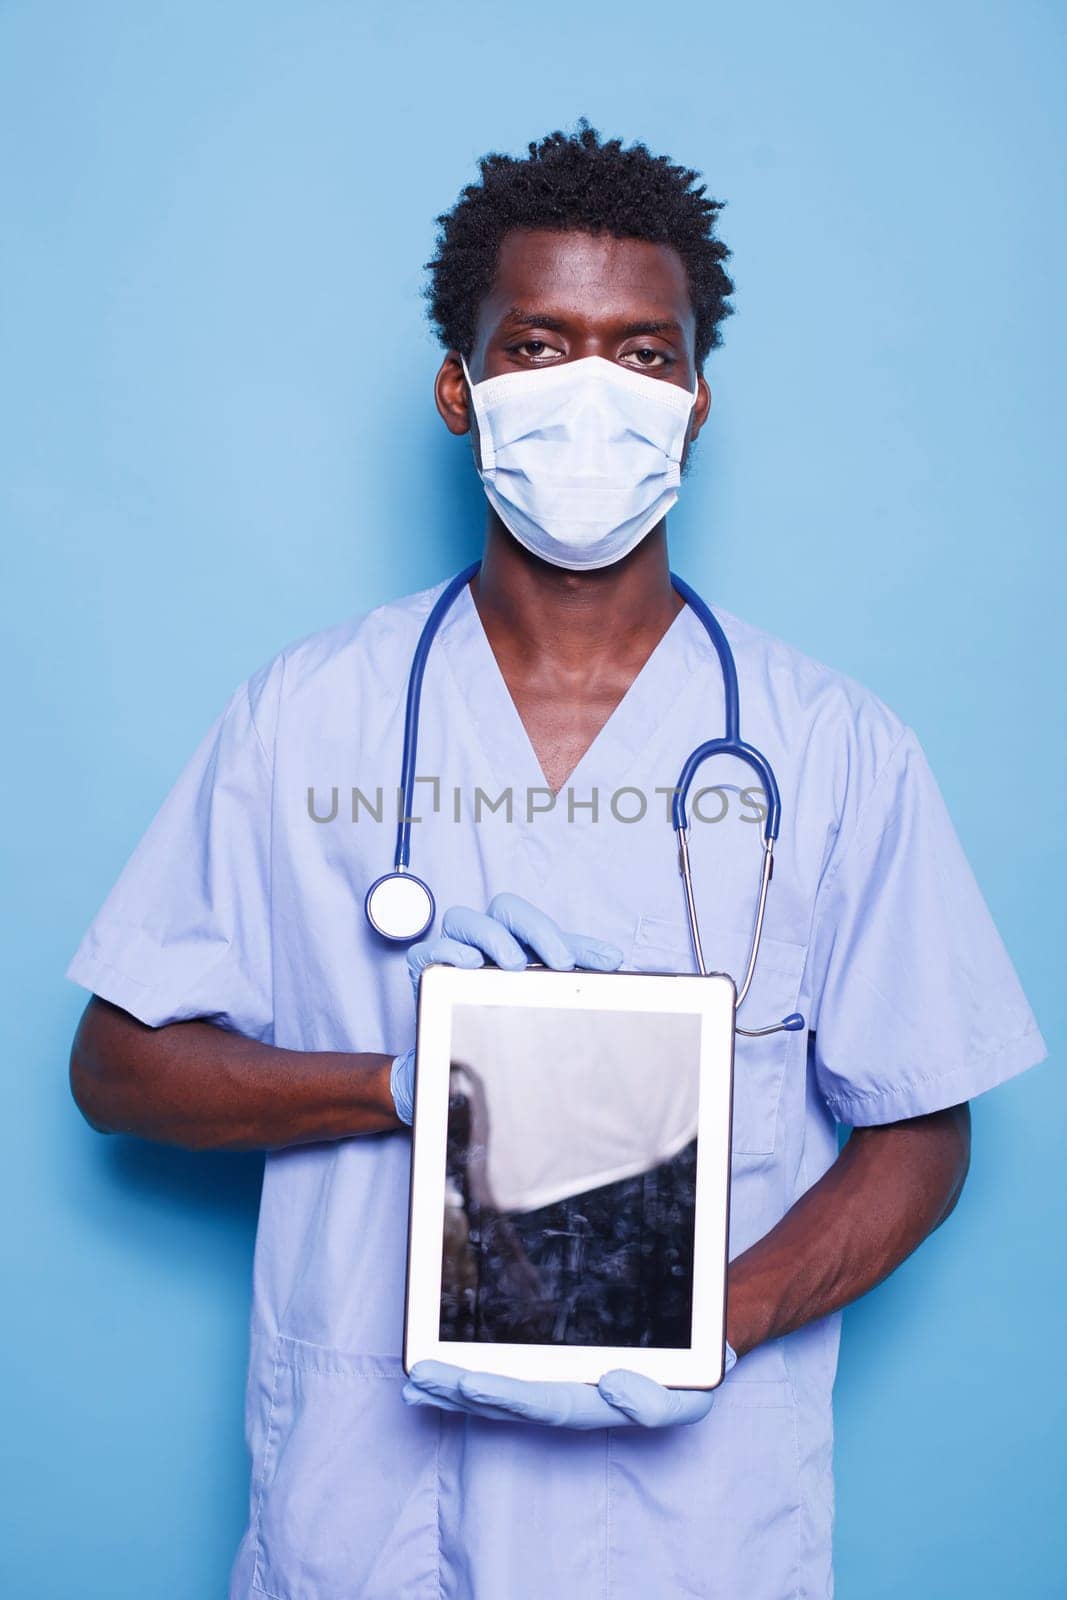 Male nurse looking at camera while holding a tablet with blank screen, against blue background. Demonstrating healthcare expertise, black man wears scrubs, face mask, gloves, and stethoscope.